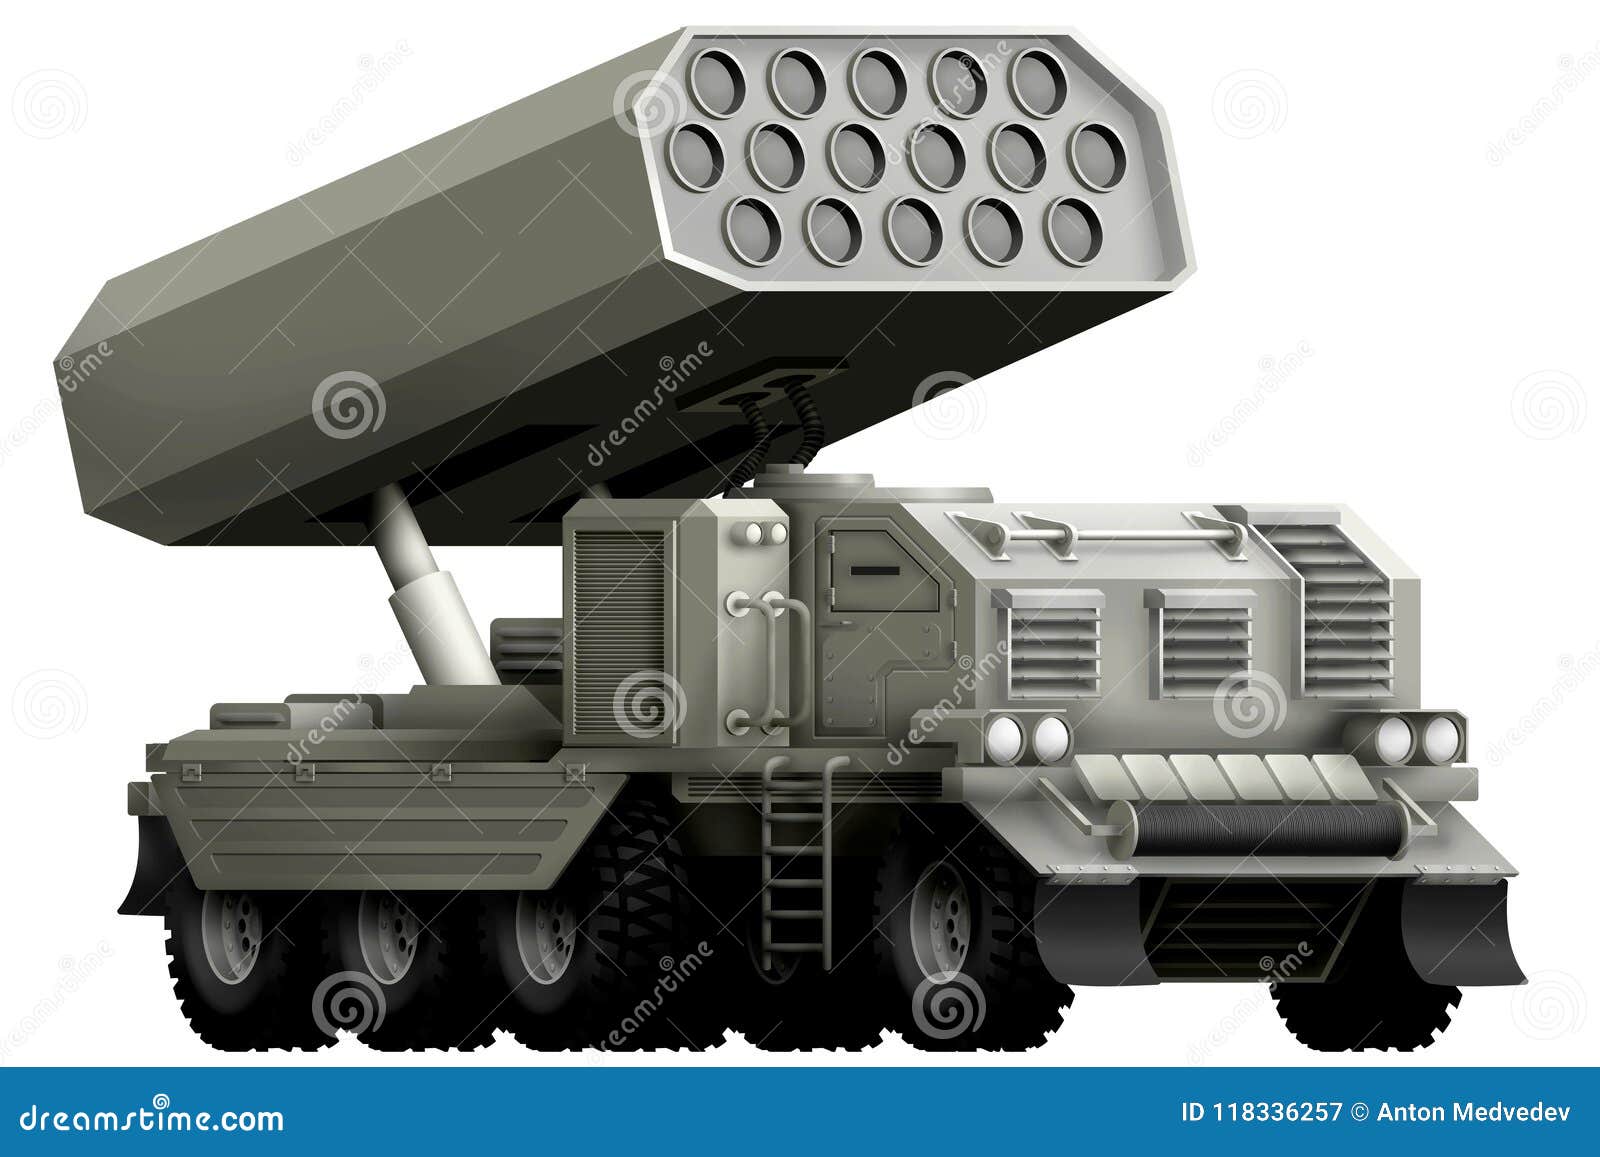 Rocket Artillery, Missile Launcher with Fictional Design - Isolated